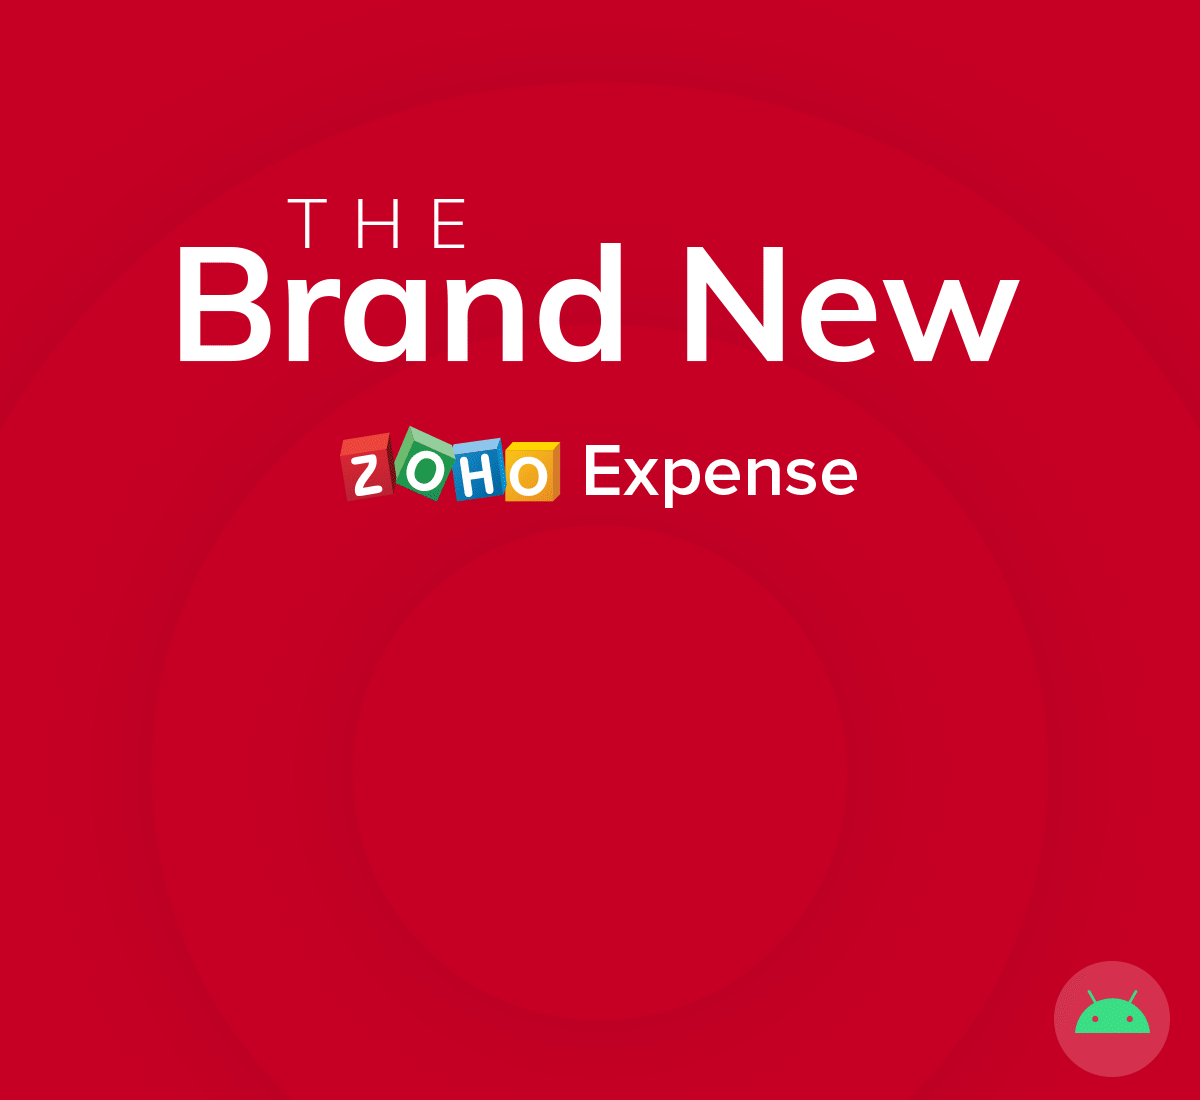 The brand new Zoho Expense for Android